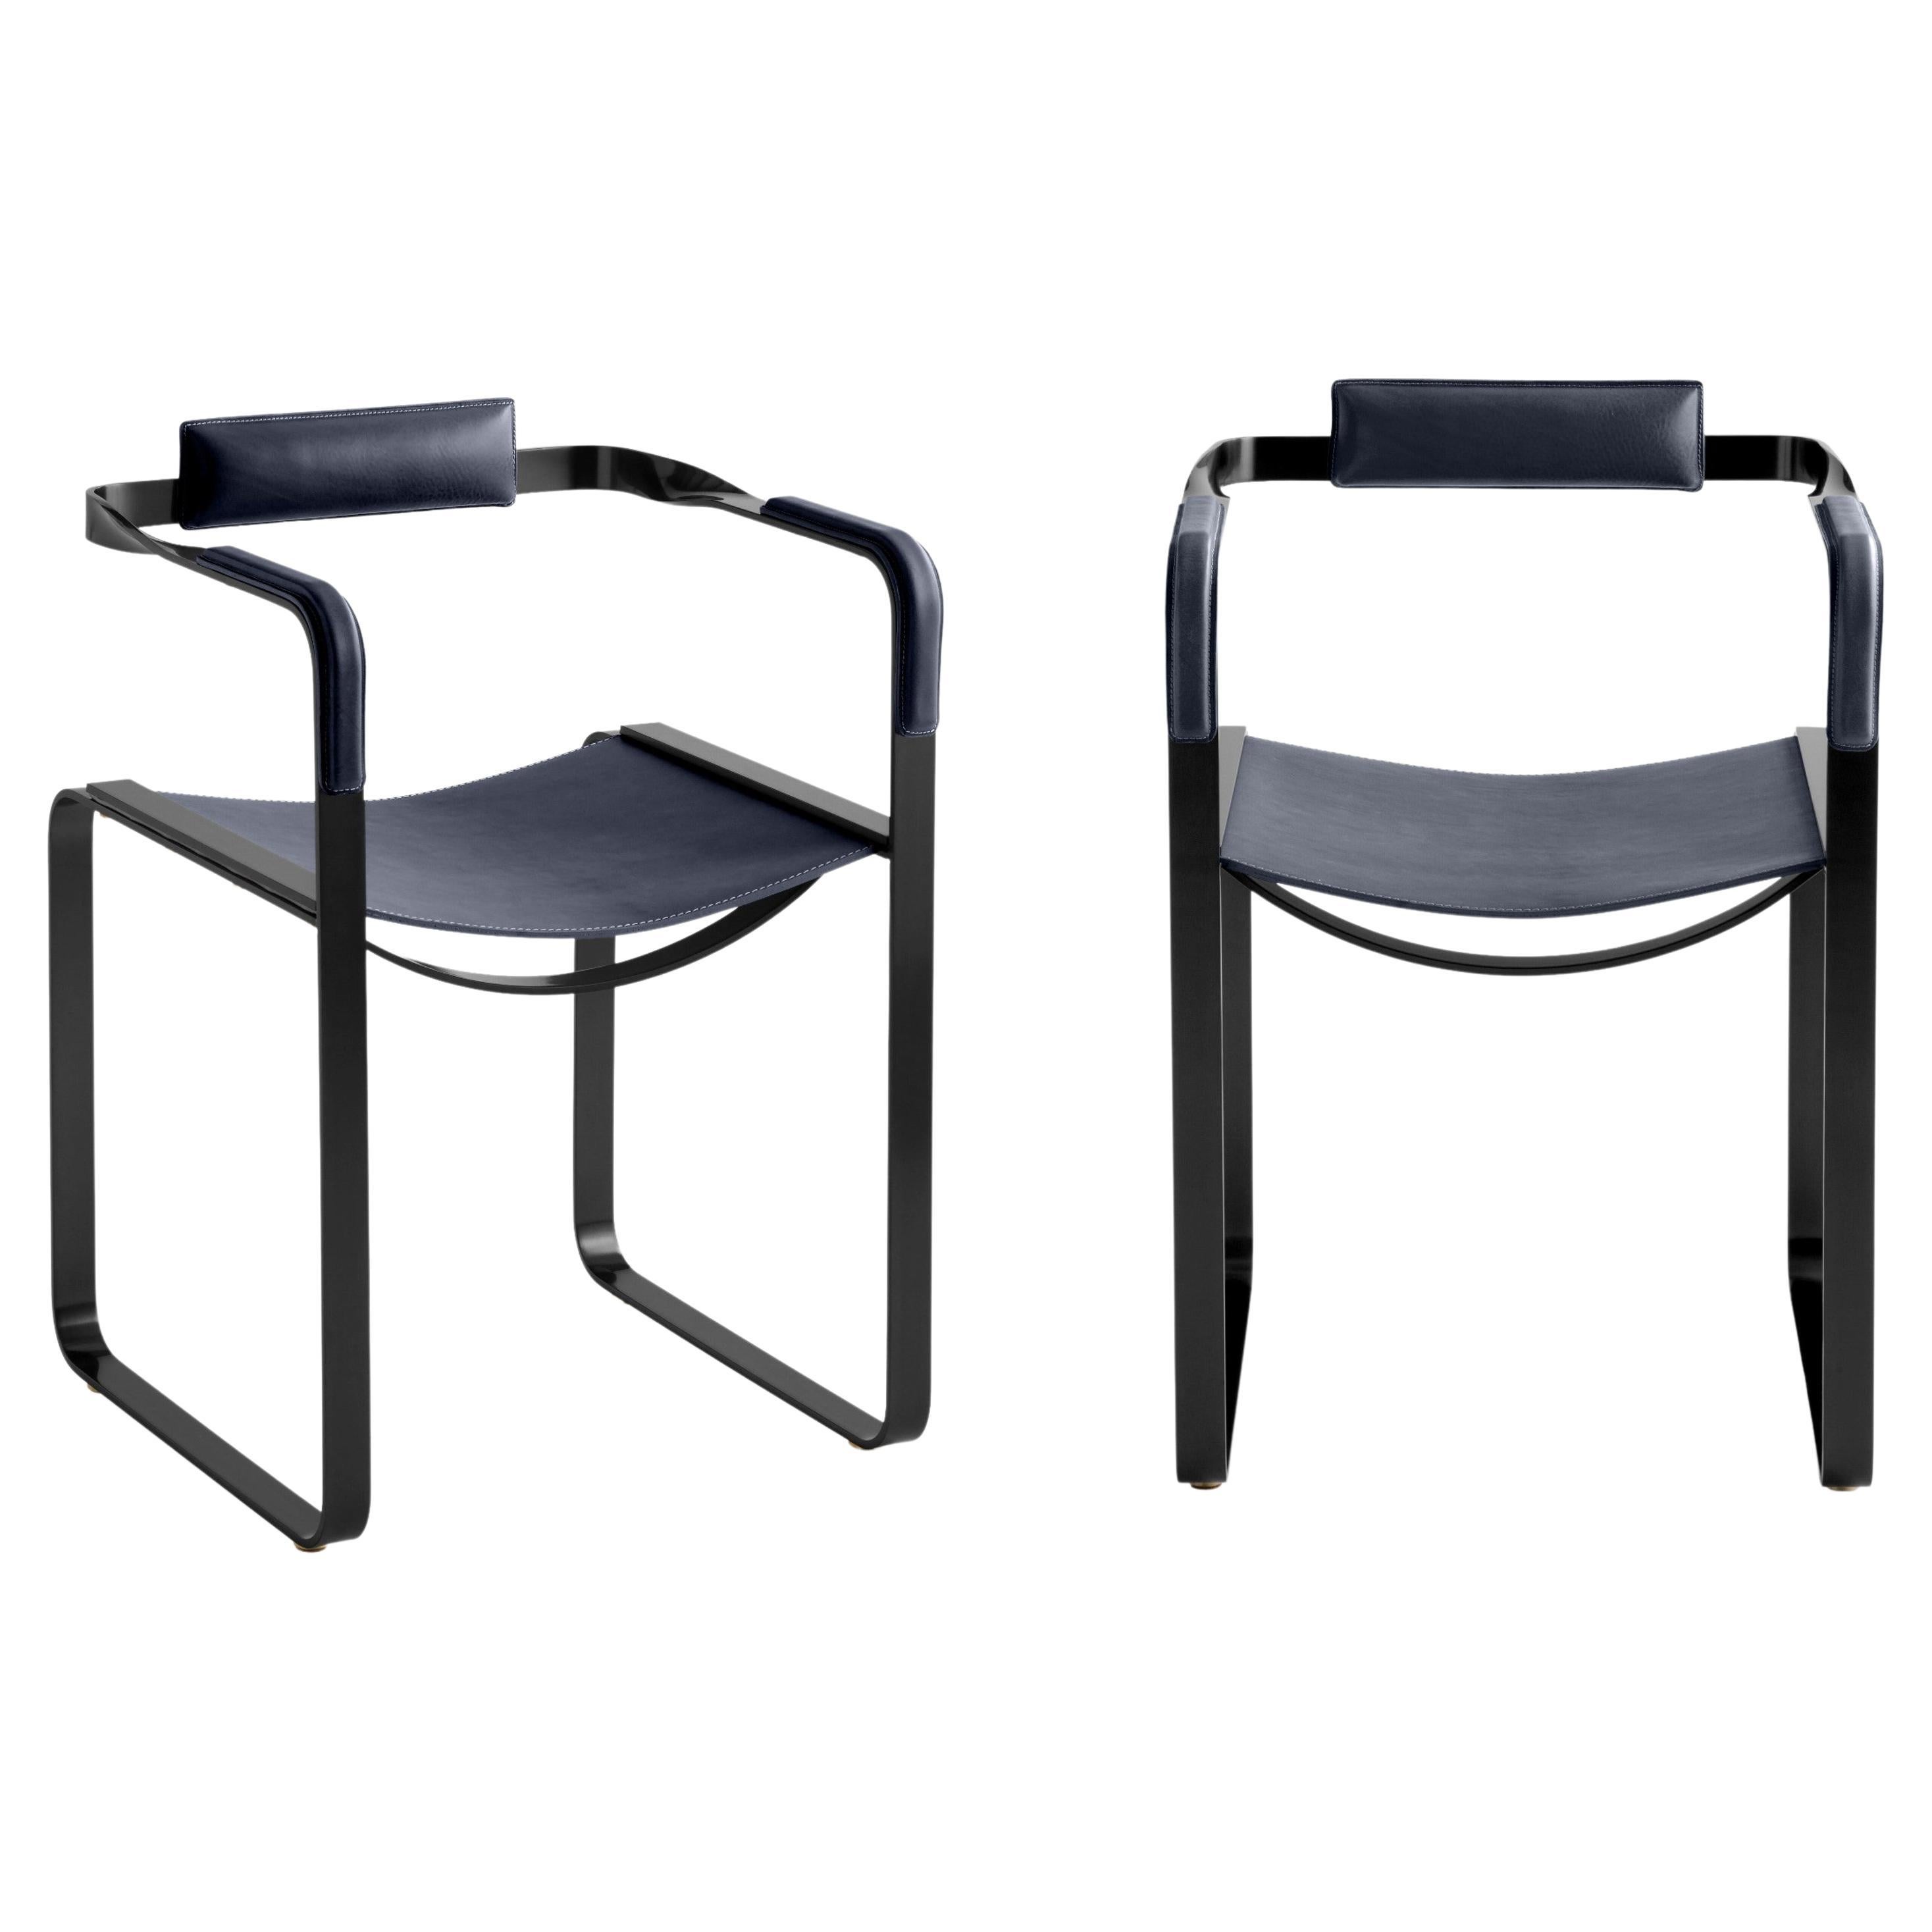 Set of 2 Armchair, Black Smoke Steel & Blue Navy Saddle, Contemporary Style For Sale